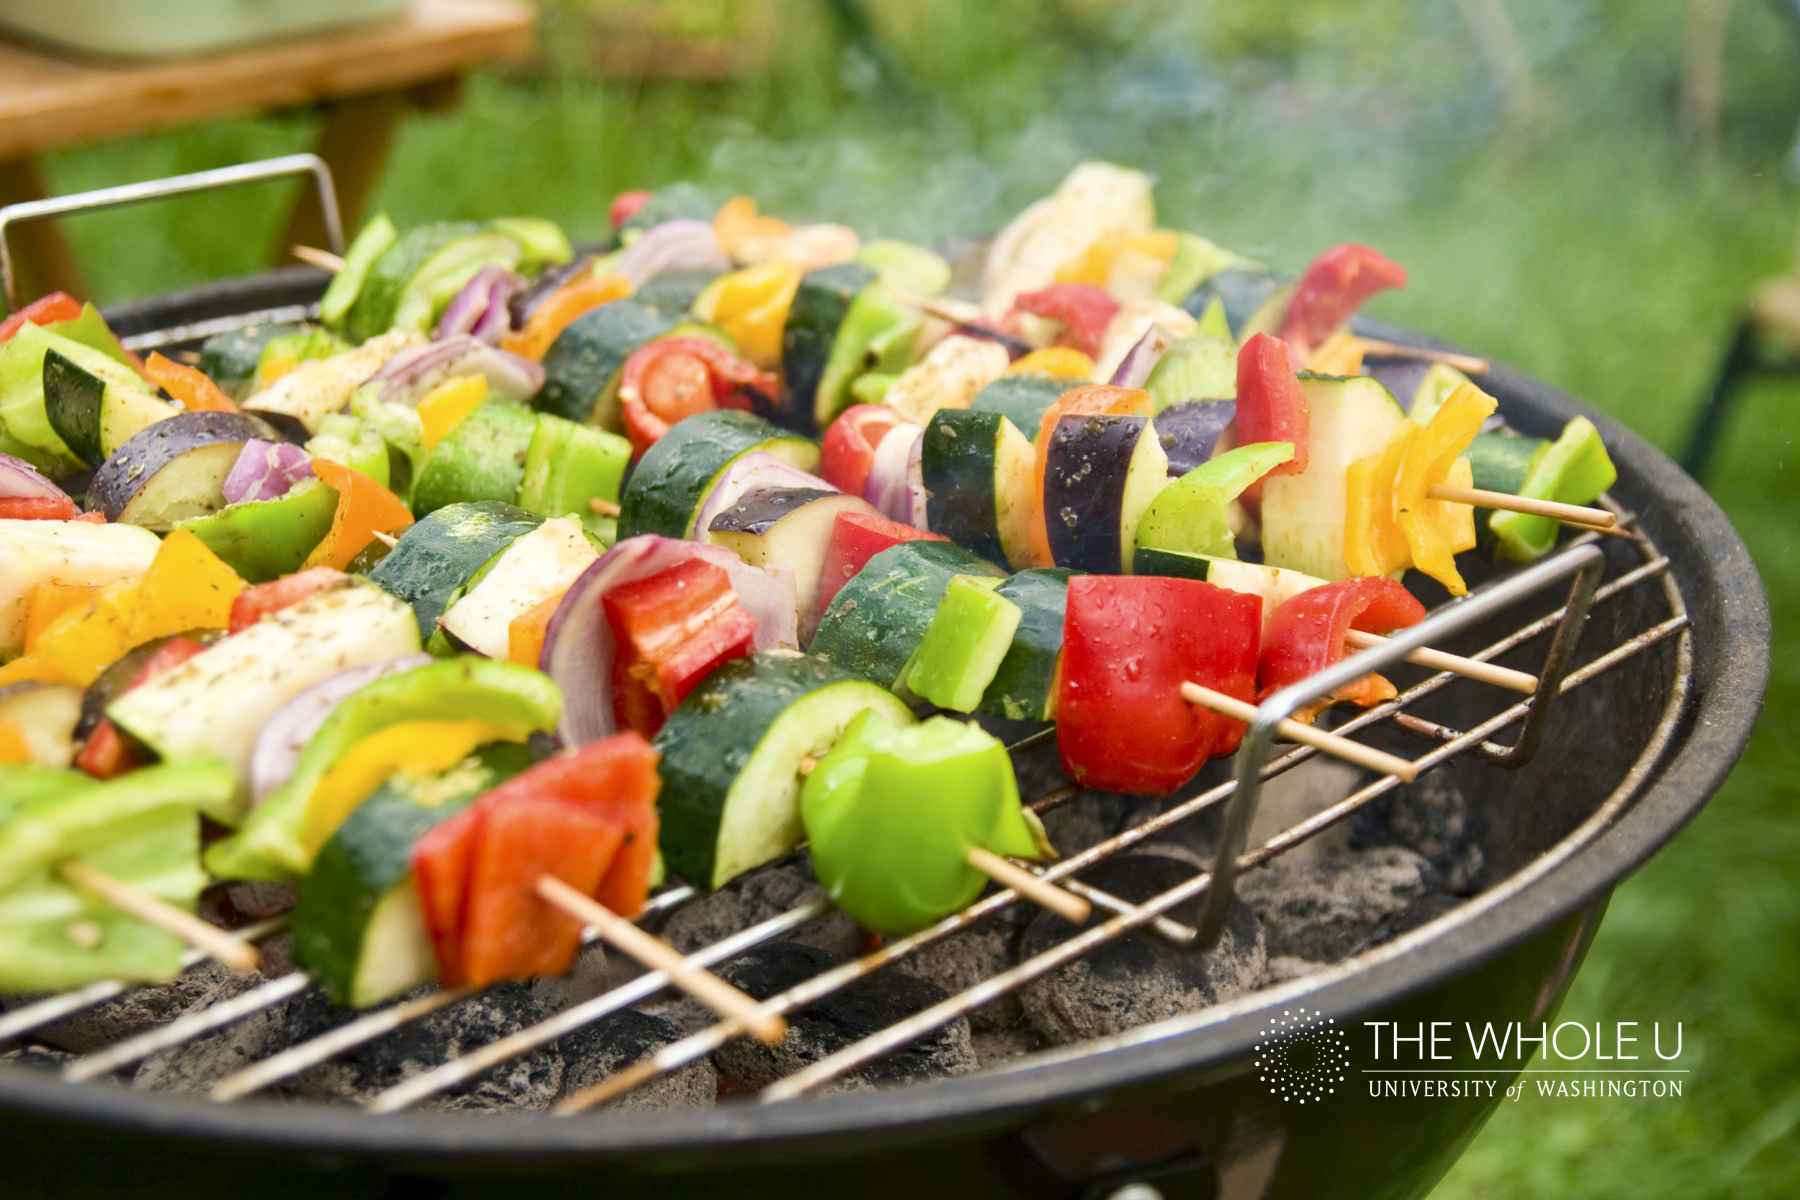 How to grill fruits and vegetables - The Whole U